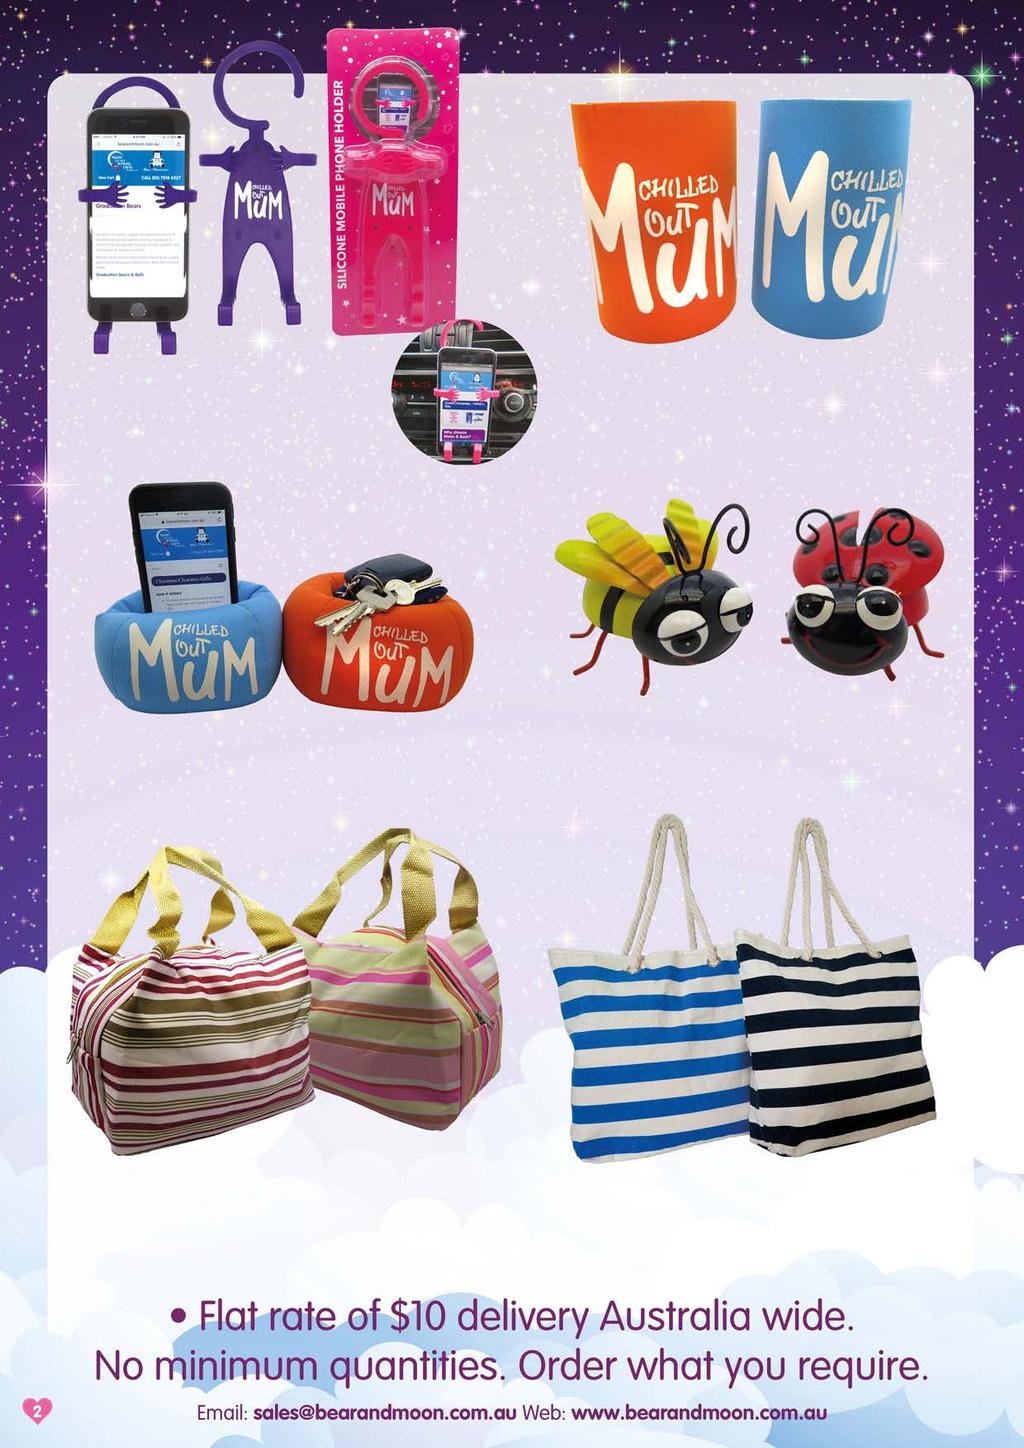 PHONE HOLDER MD1905 Two designs. Universal. (20cm x 8cm) Hard plastic packaging. $ 2.60 CAN COOLER MD1906 Two designs.